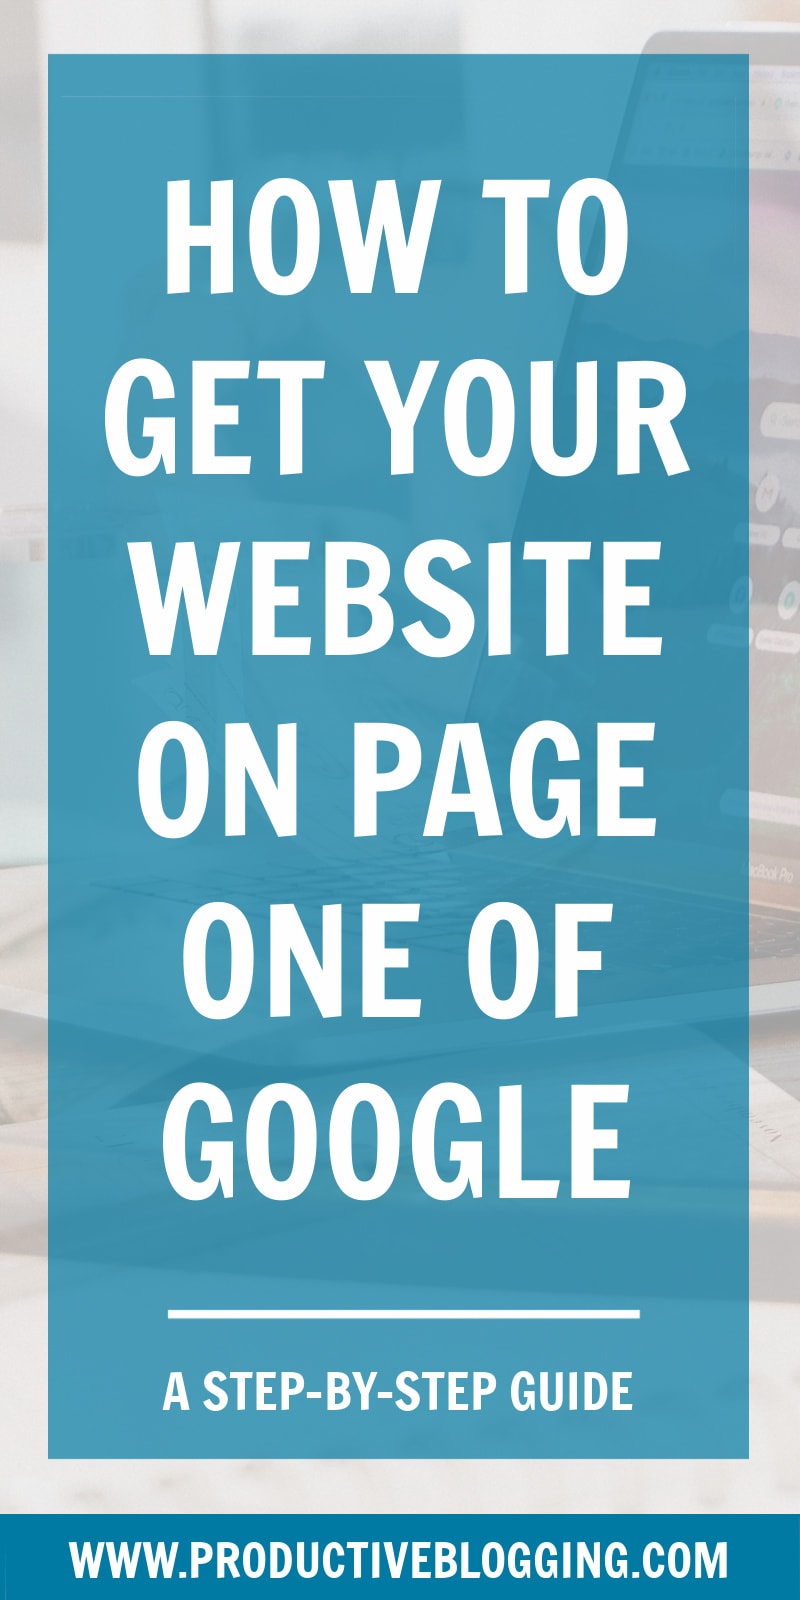 Getting your website to rank on Page 1 of Google will boost your traffic and income. But how do you do it? Here’s how to get your website on the first page of Google… #pageoneofgoogle #firstpageofgoogle #googlerankingfactors #googleSEO #SEO #SEOtips #SEOhacks #searchengineoptimization #SEOforbloggers #SEOforbeginners #beginnersSEO #blogSEO #growyourblog #bloggrowth #bloggingtips #blogtips #blogging #bloggers #productiveblogging